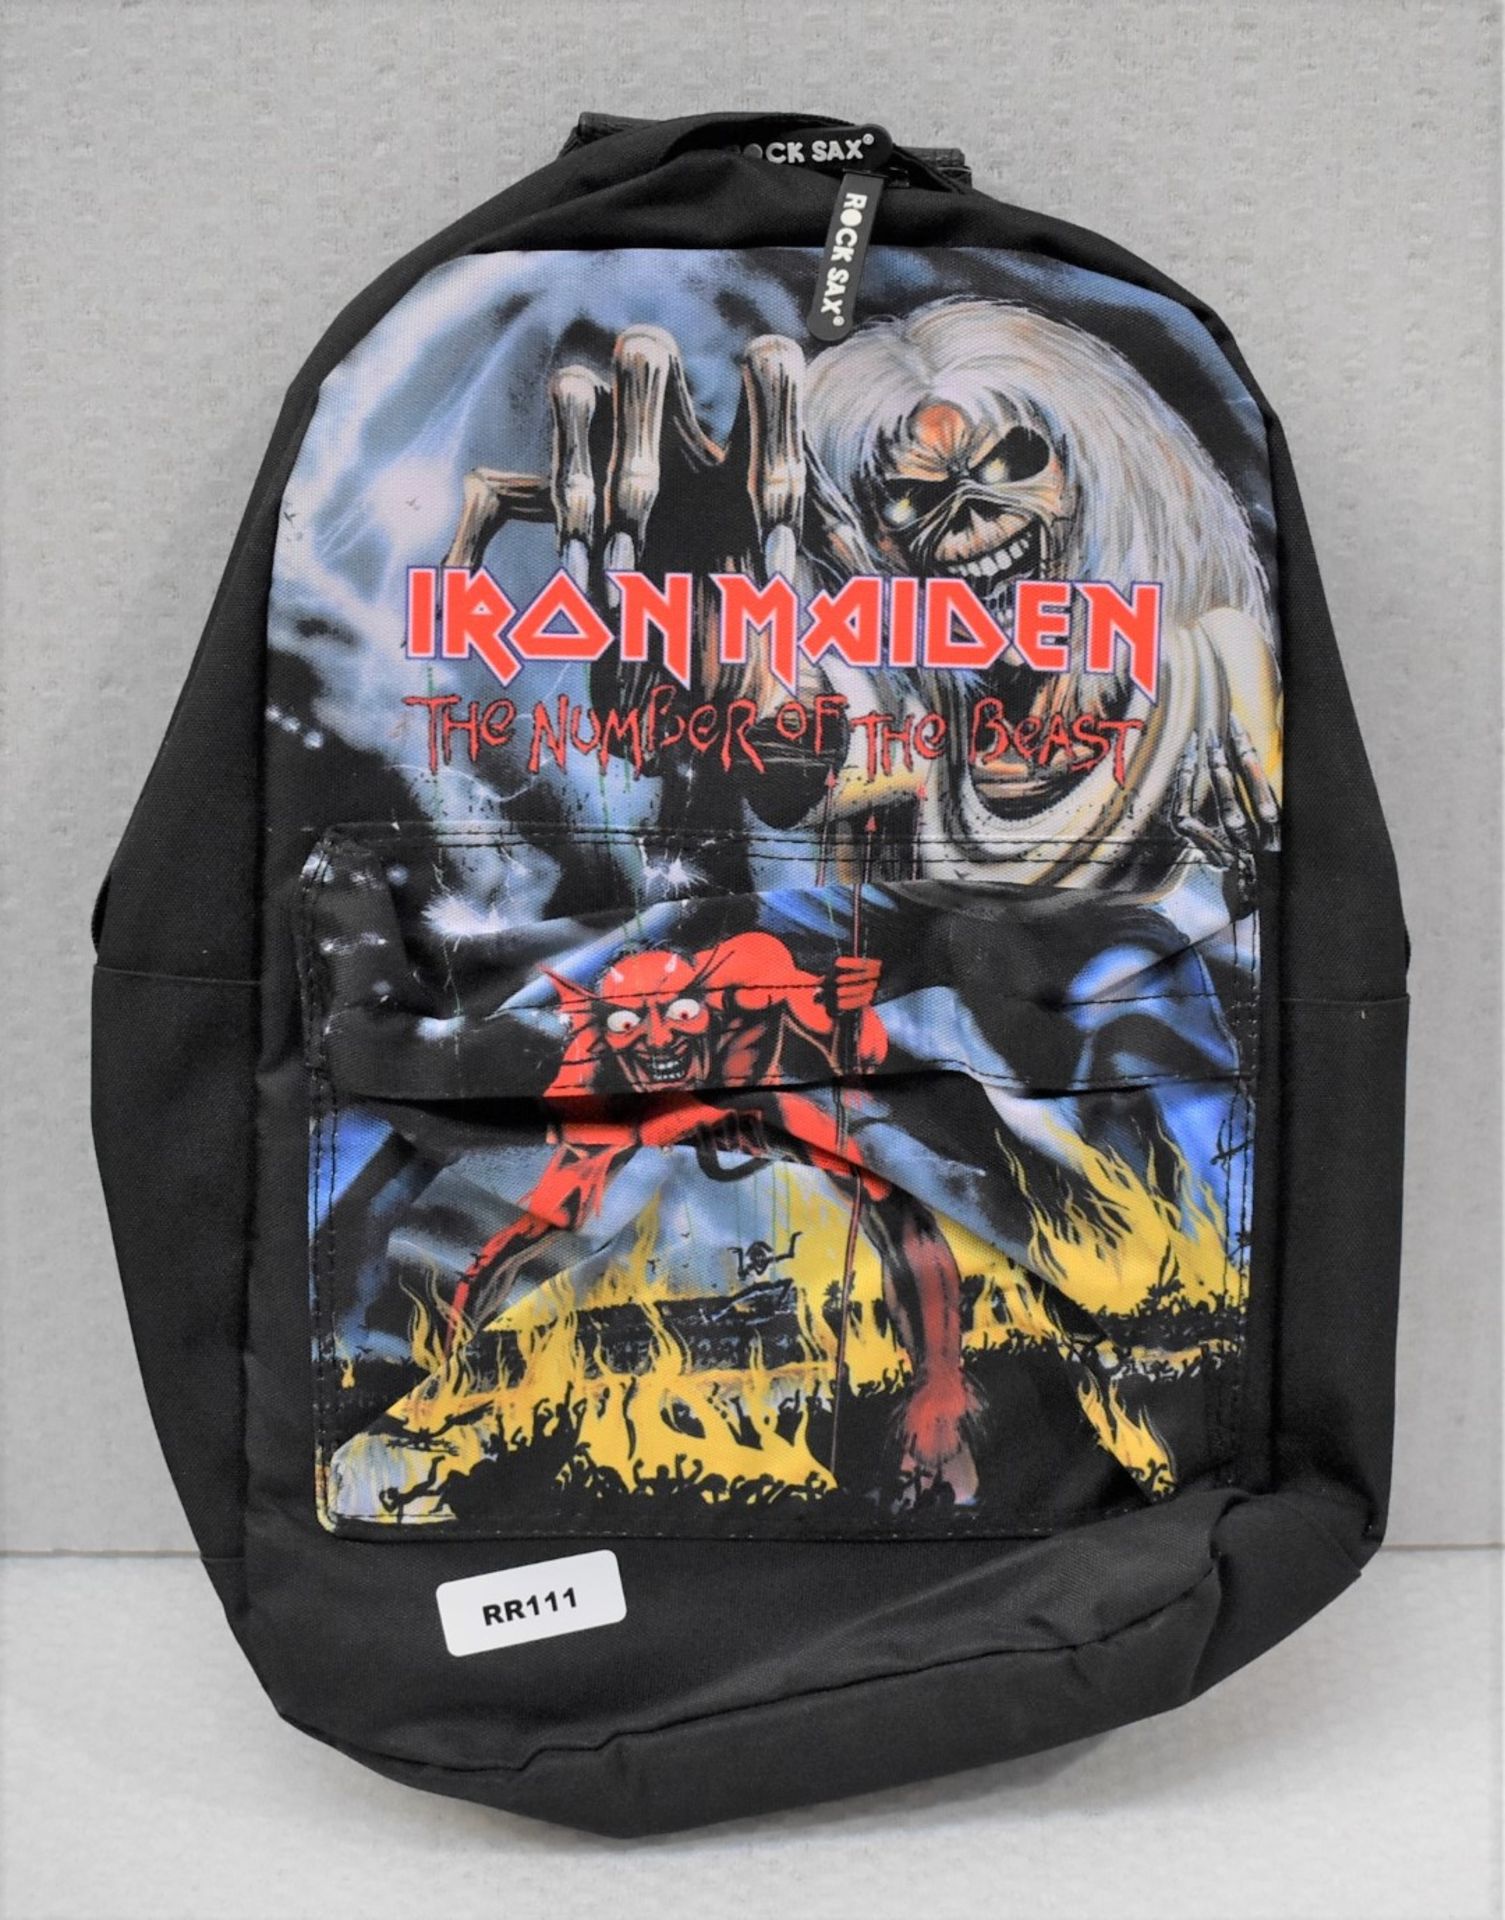 1 x Iron Maiden Number Of The Beast Backpack Bag by Rock Sax - Officially Licensed Merchandise - - Image 2 of 5